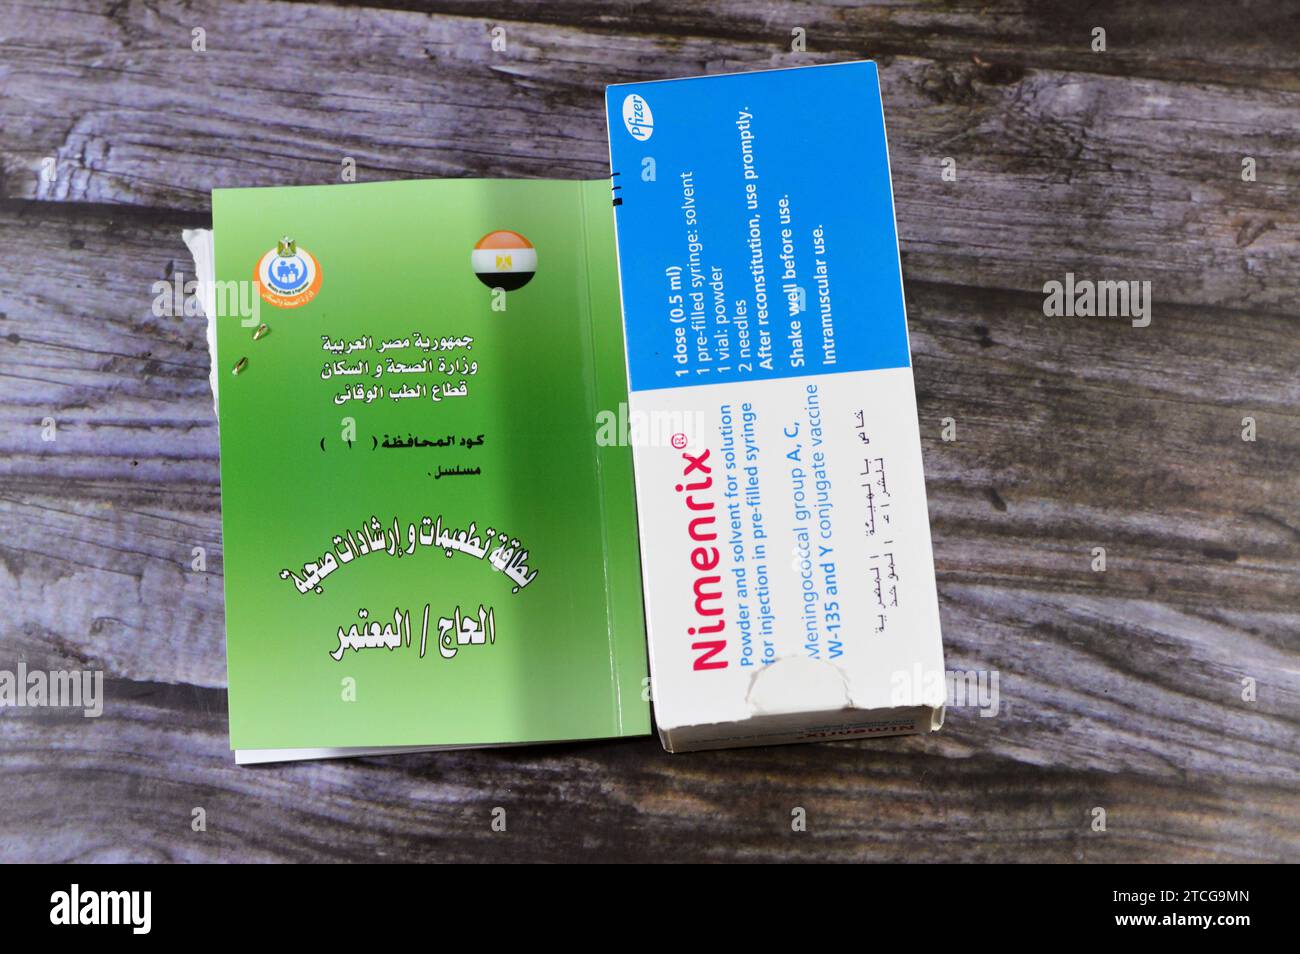 Cairo, Egypt, December 4 2023: Nimenrix vaccine against meningococcal infection, Vaccination card and health instruction of preventive medicine depart Stock Photo